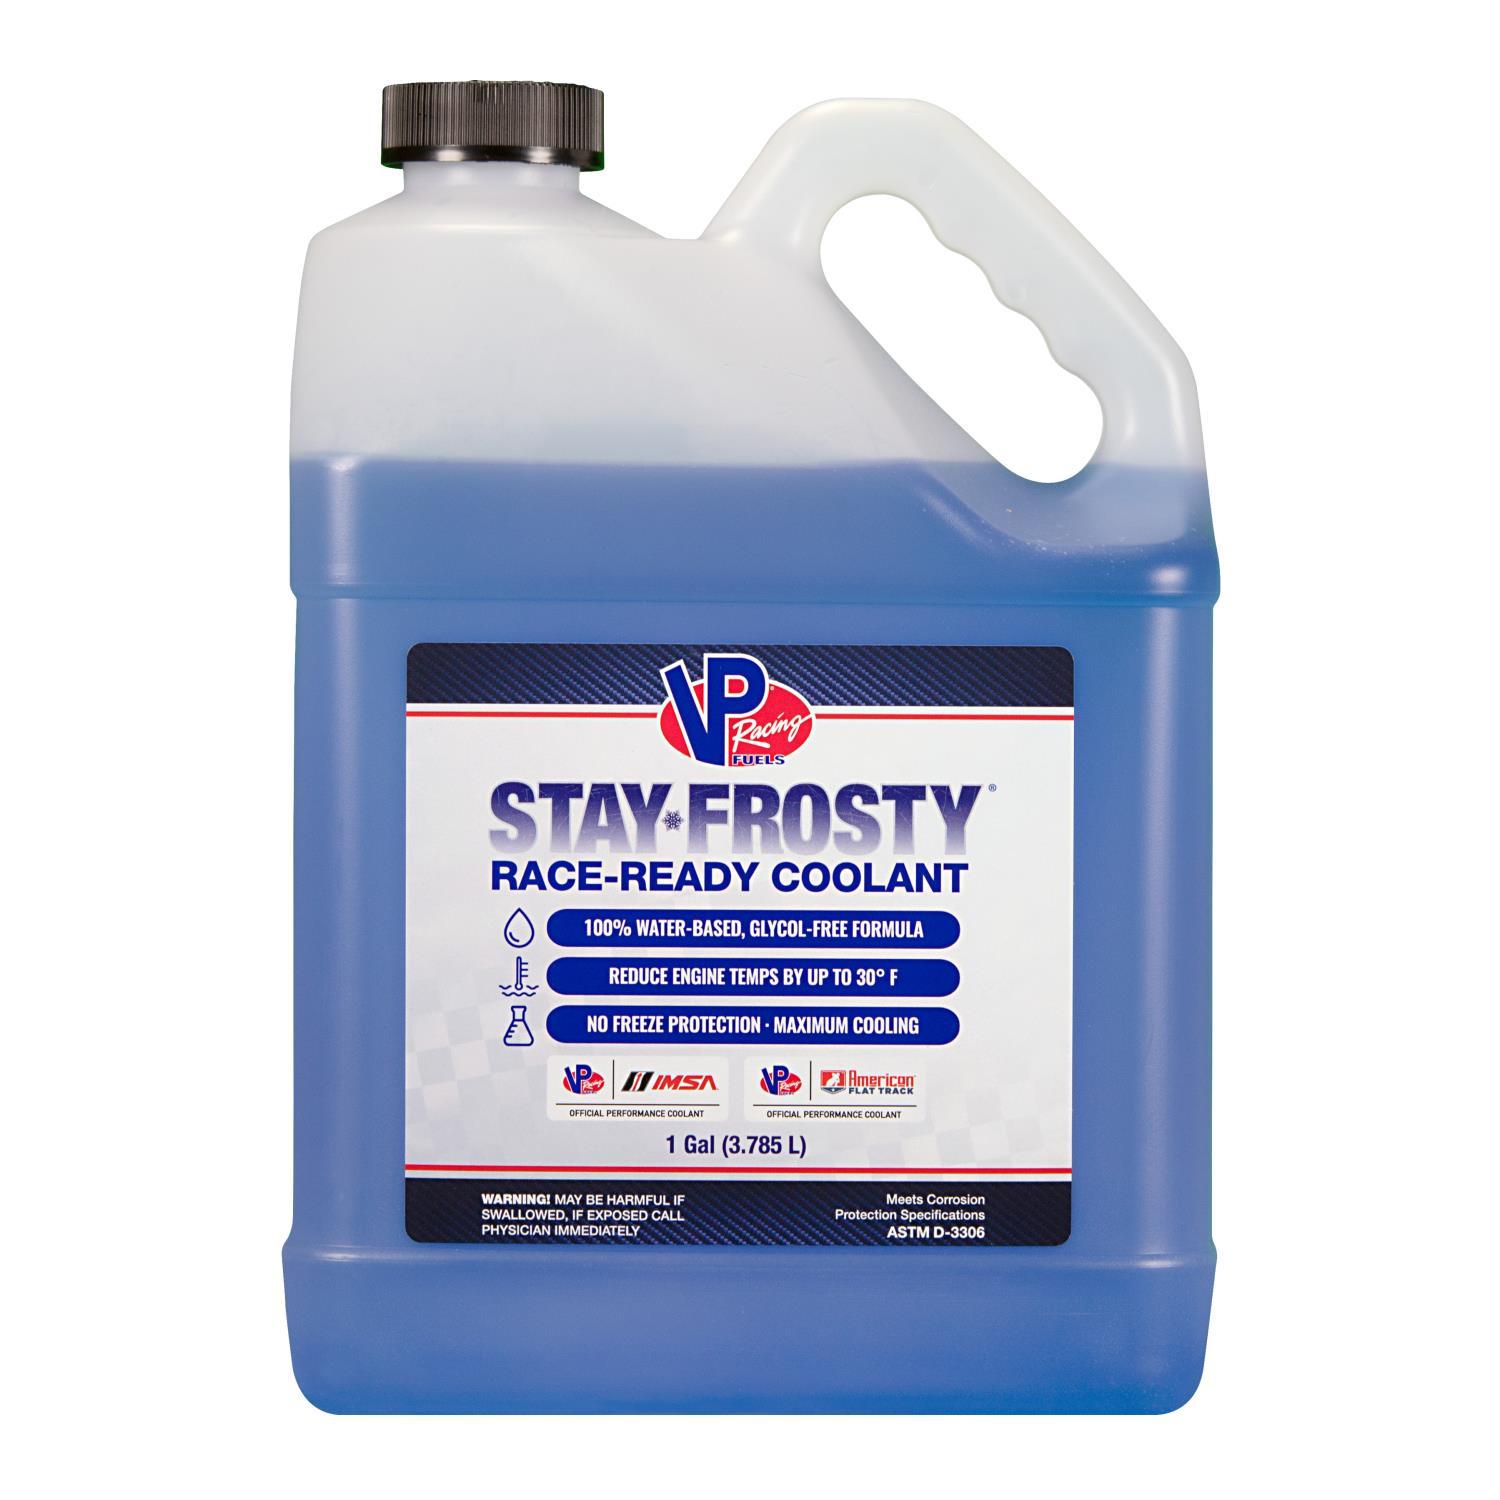 VP Racing Coolant Race Ready Stay Frosty 1 gal Oils, Fluids and Additives Antifreeze/Coolant main image